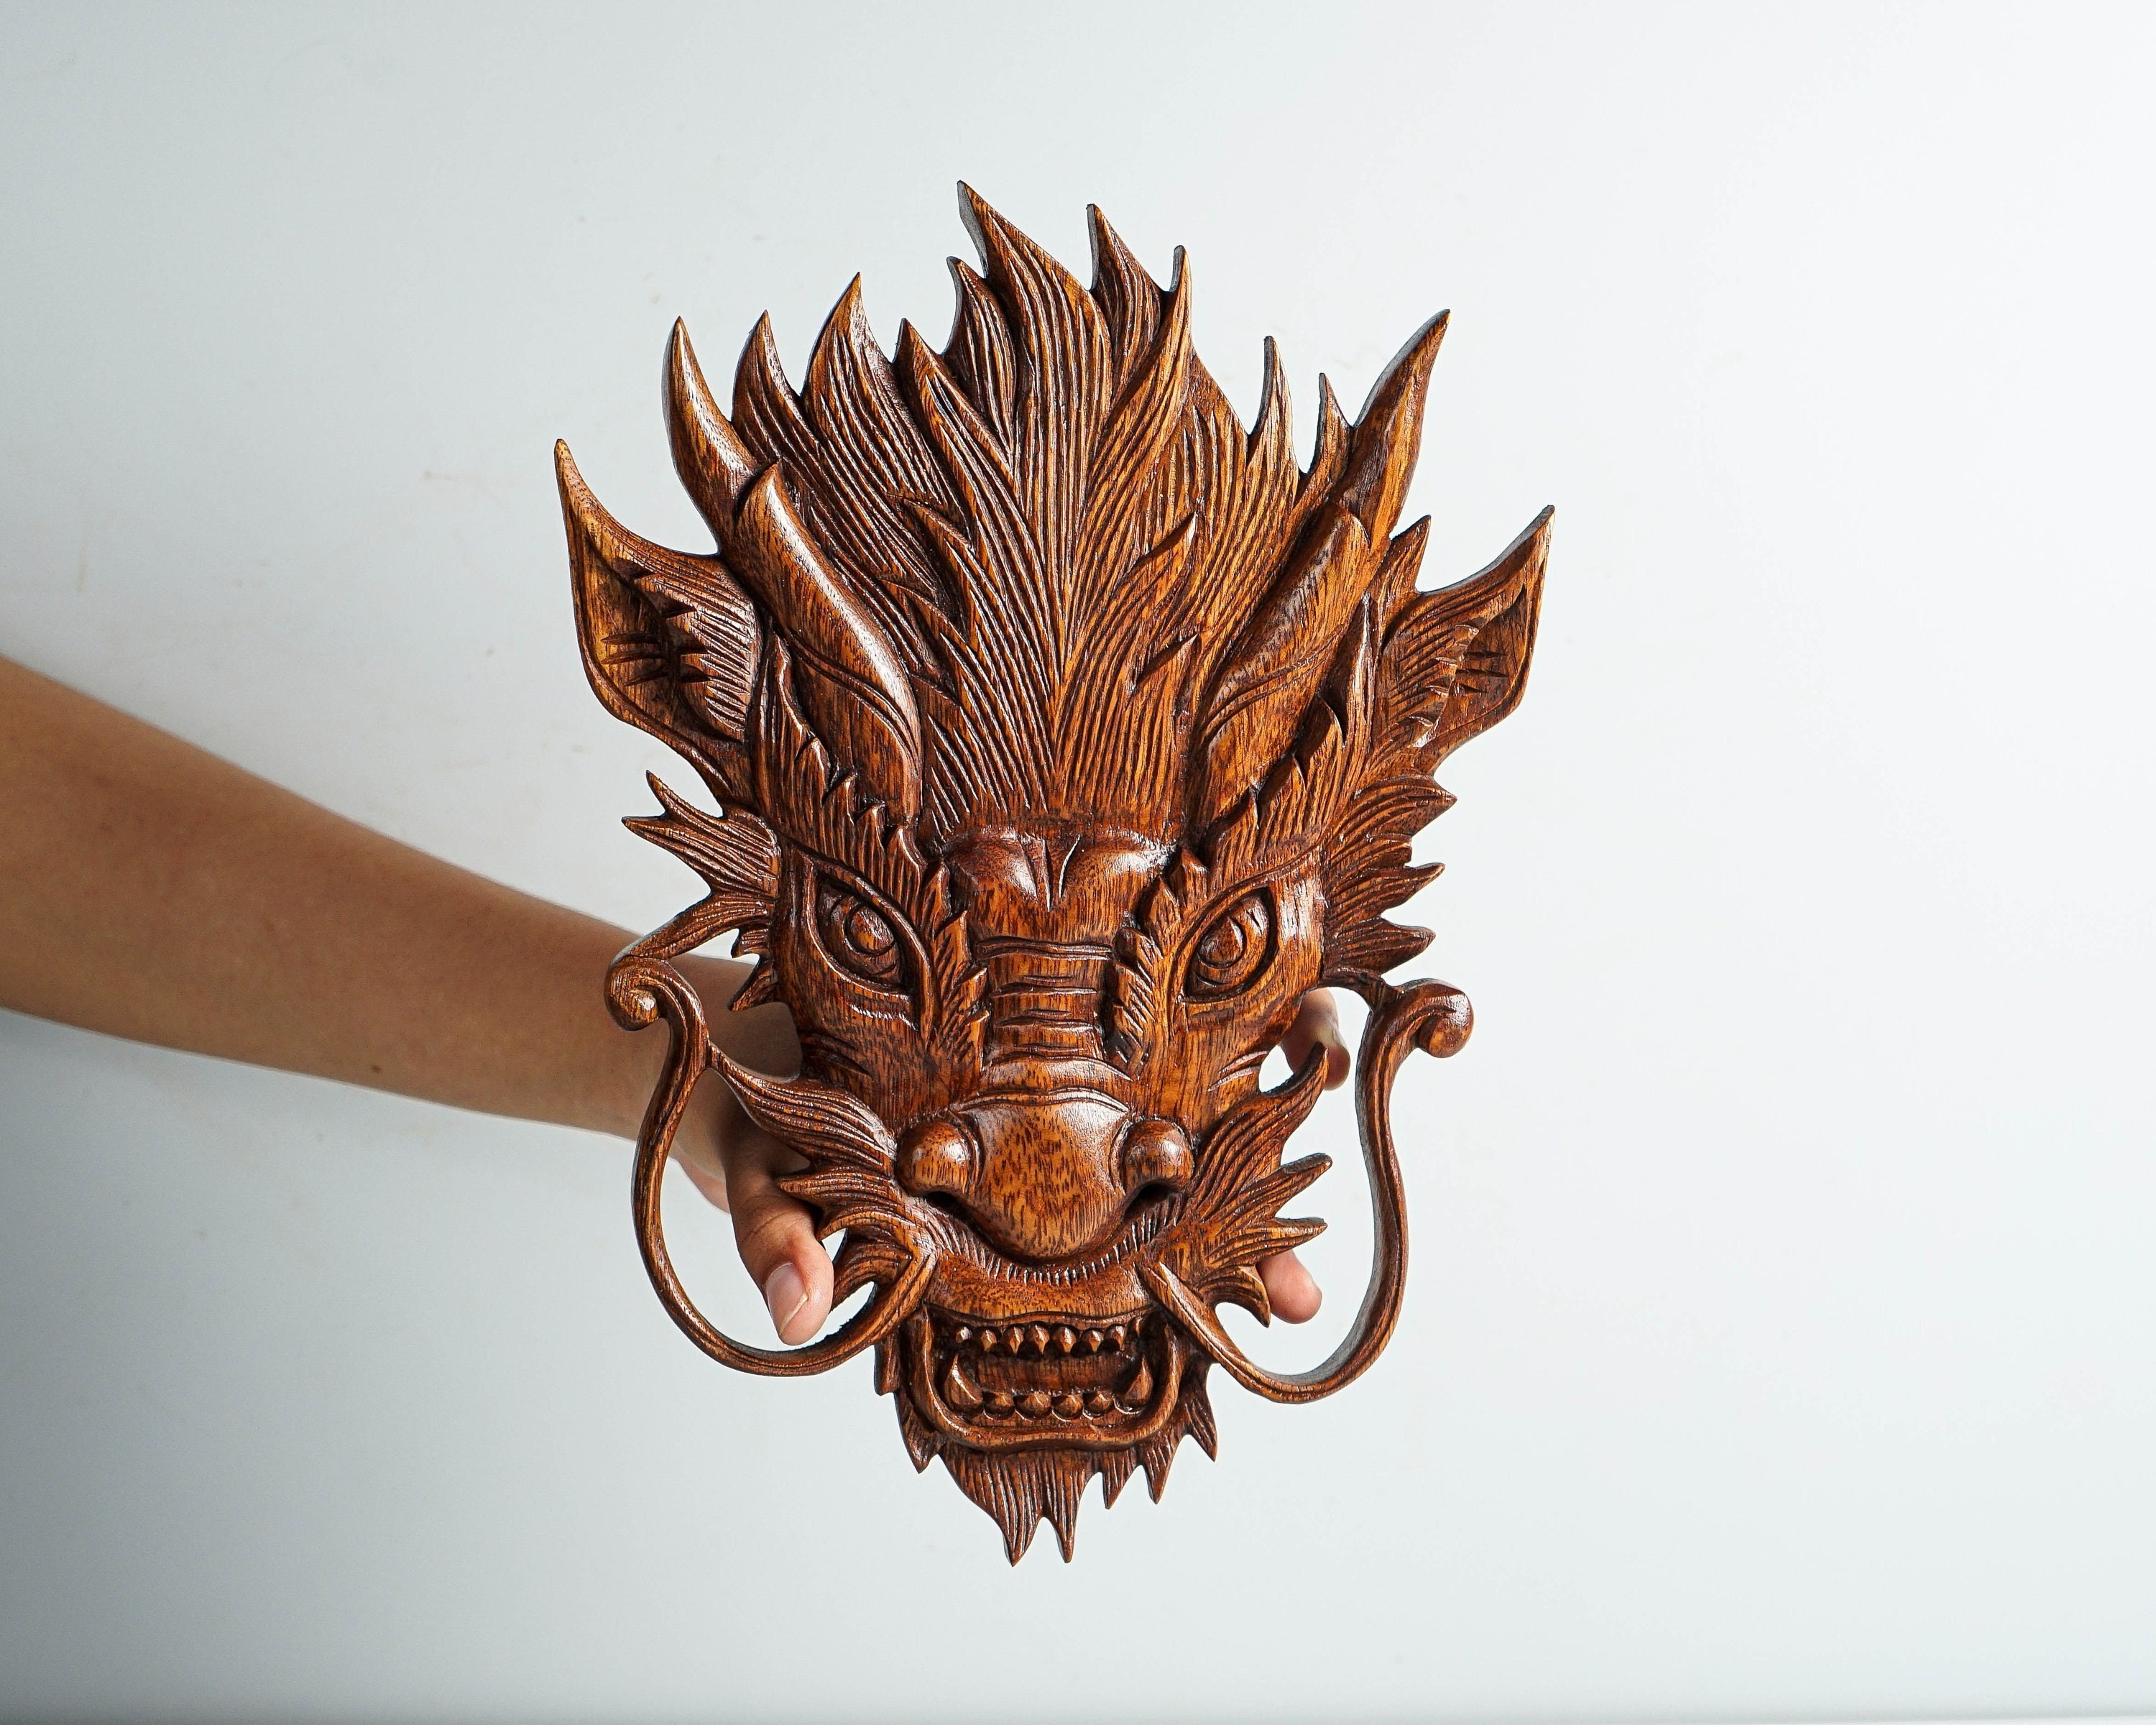 Chinese Dragon Head Wall Decor, Wall Art, Chinese Dragon, Mystical Animal,  Wood Carving Wall Art, Unique, Halloween Decor, Gift for Father 